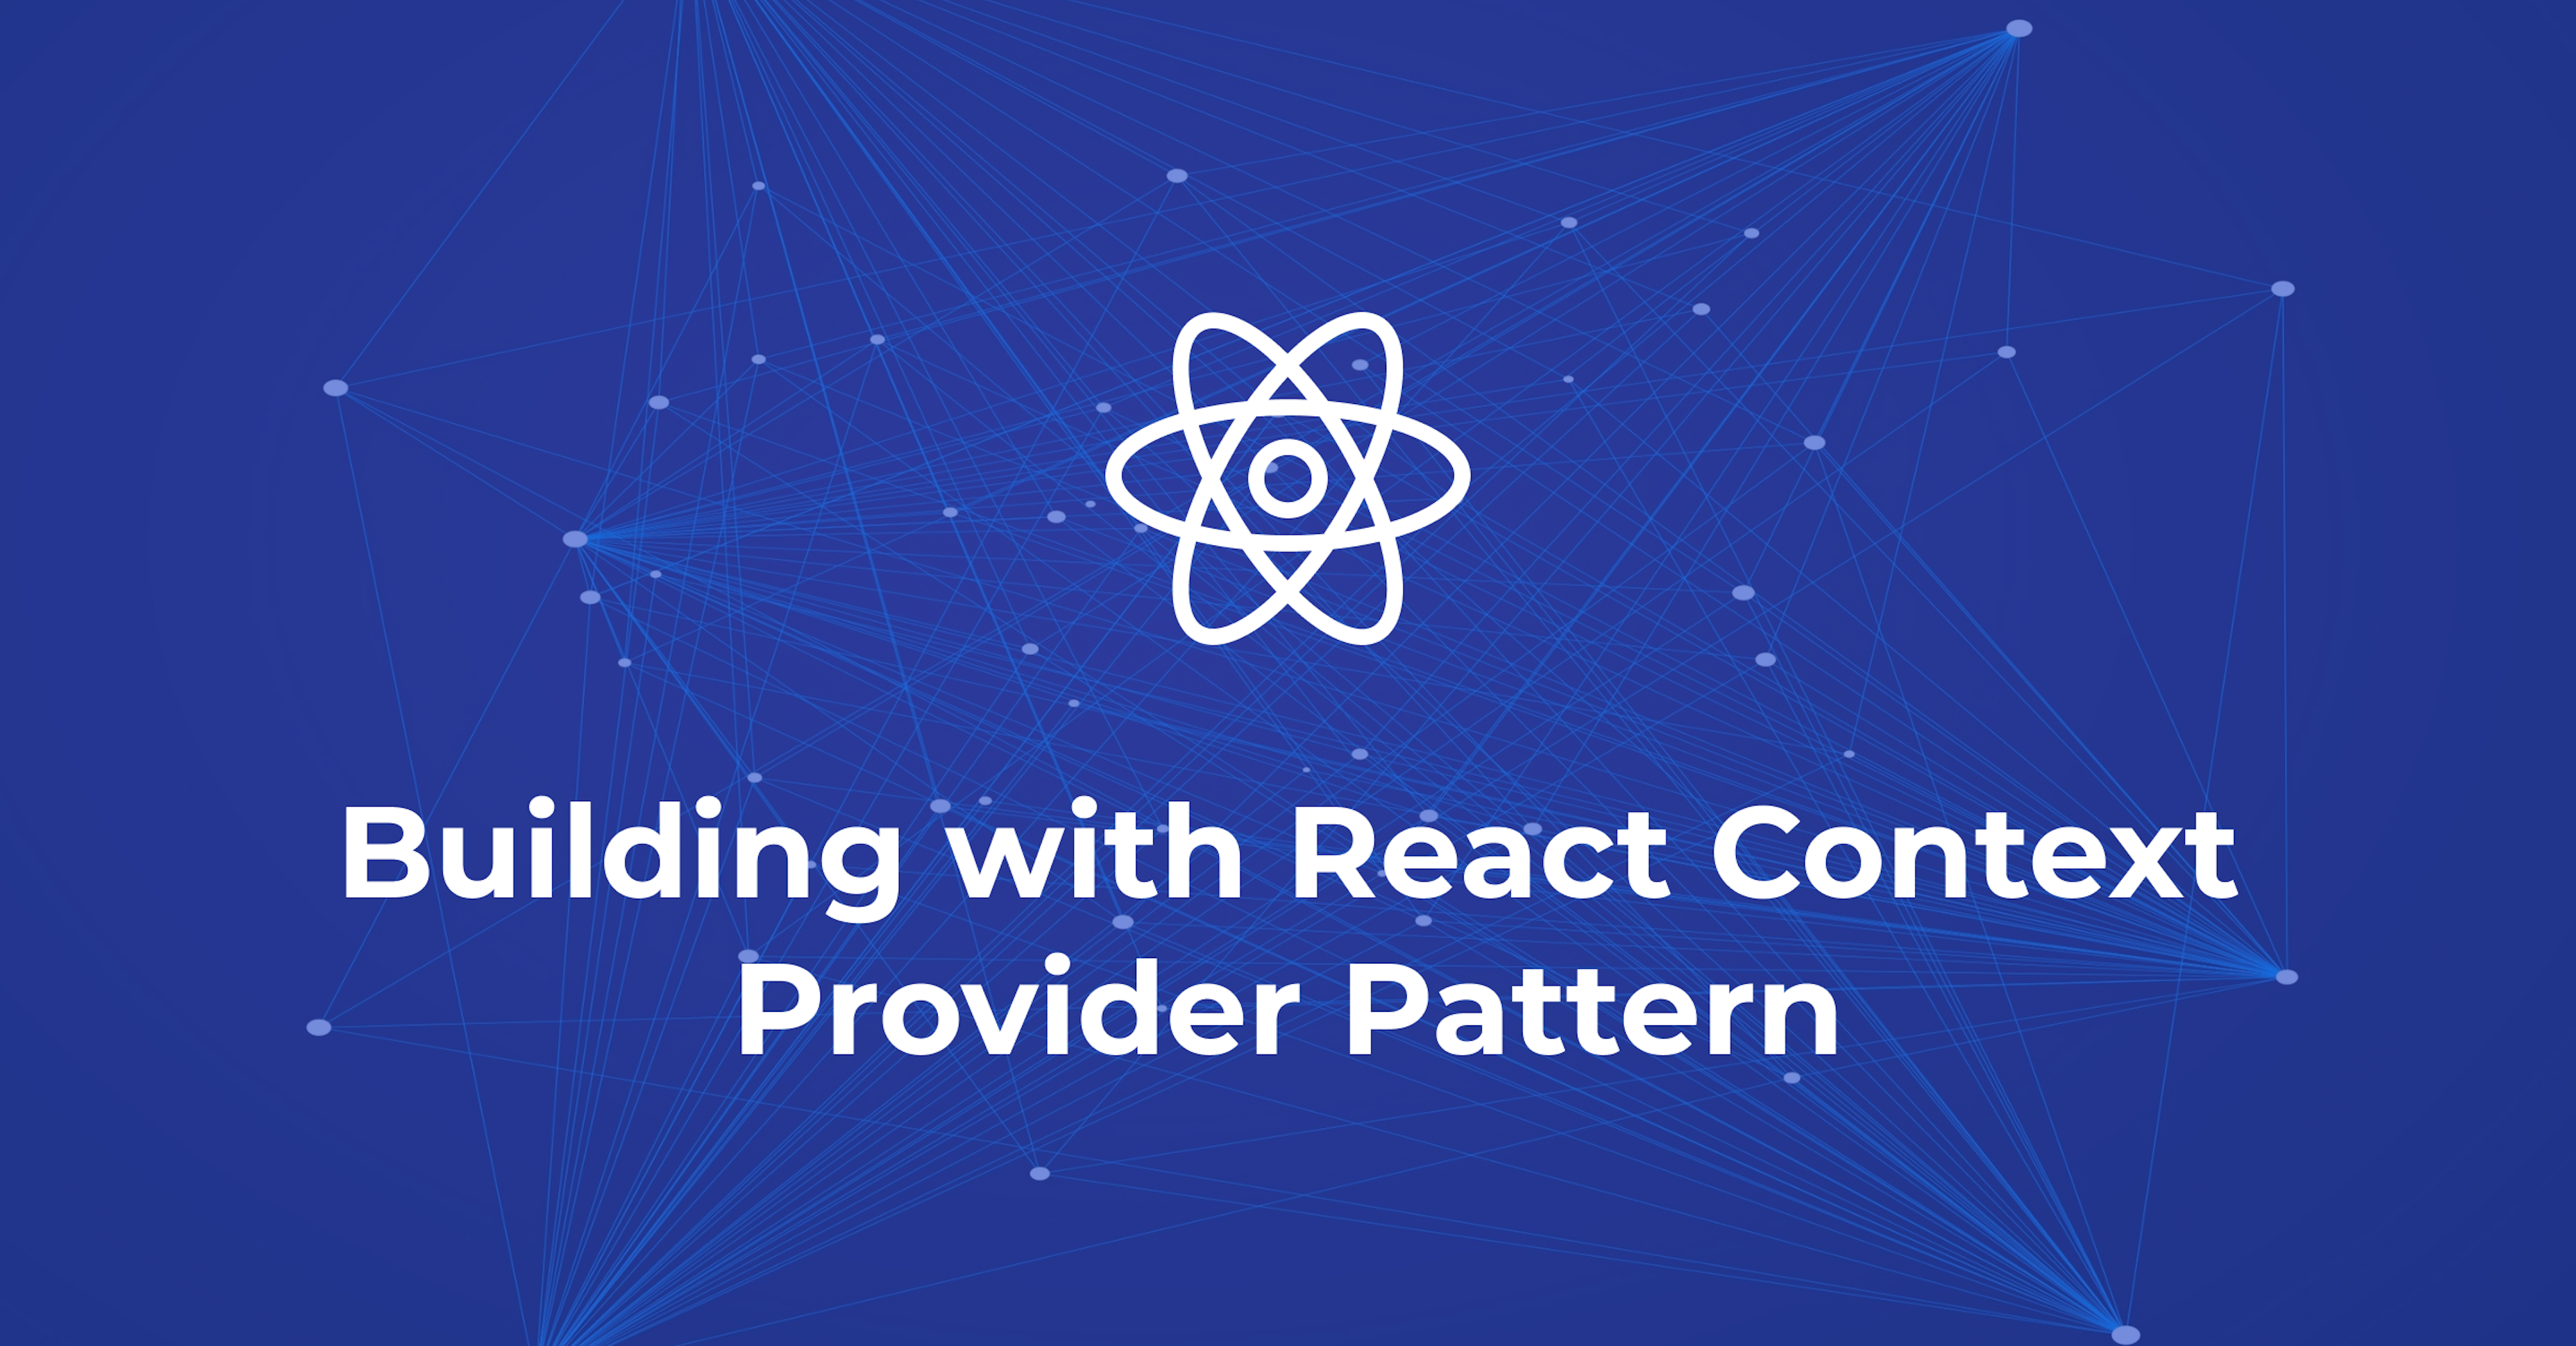 Building with React Context Provider Pattern